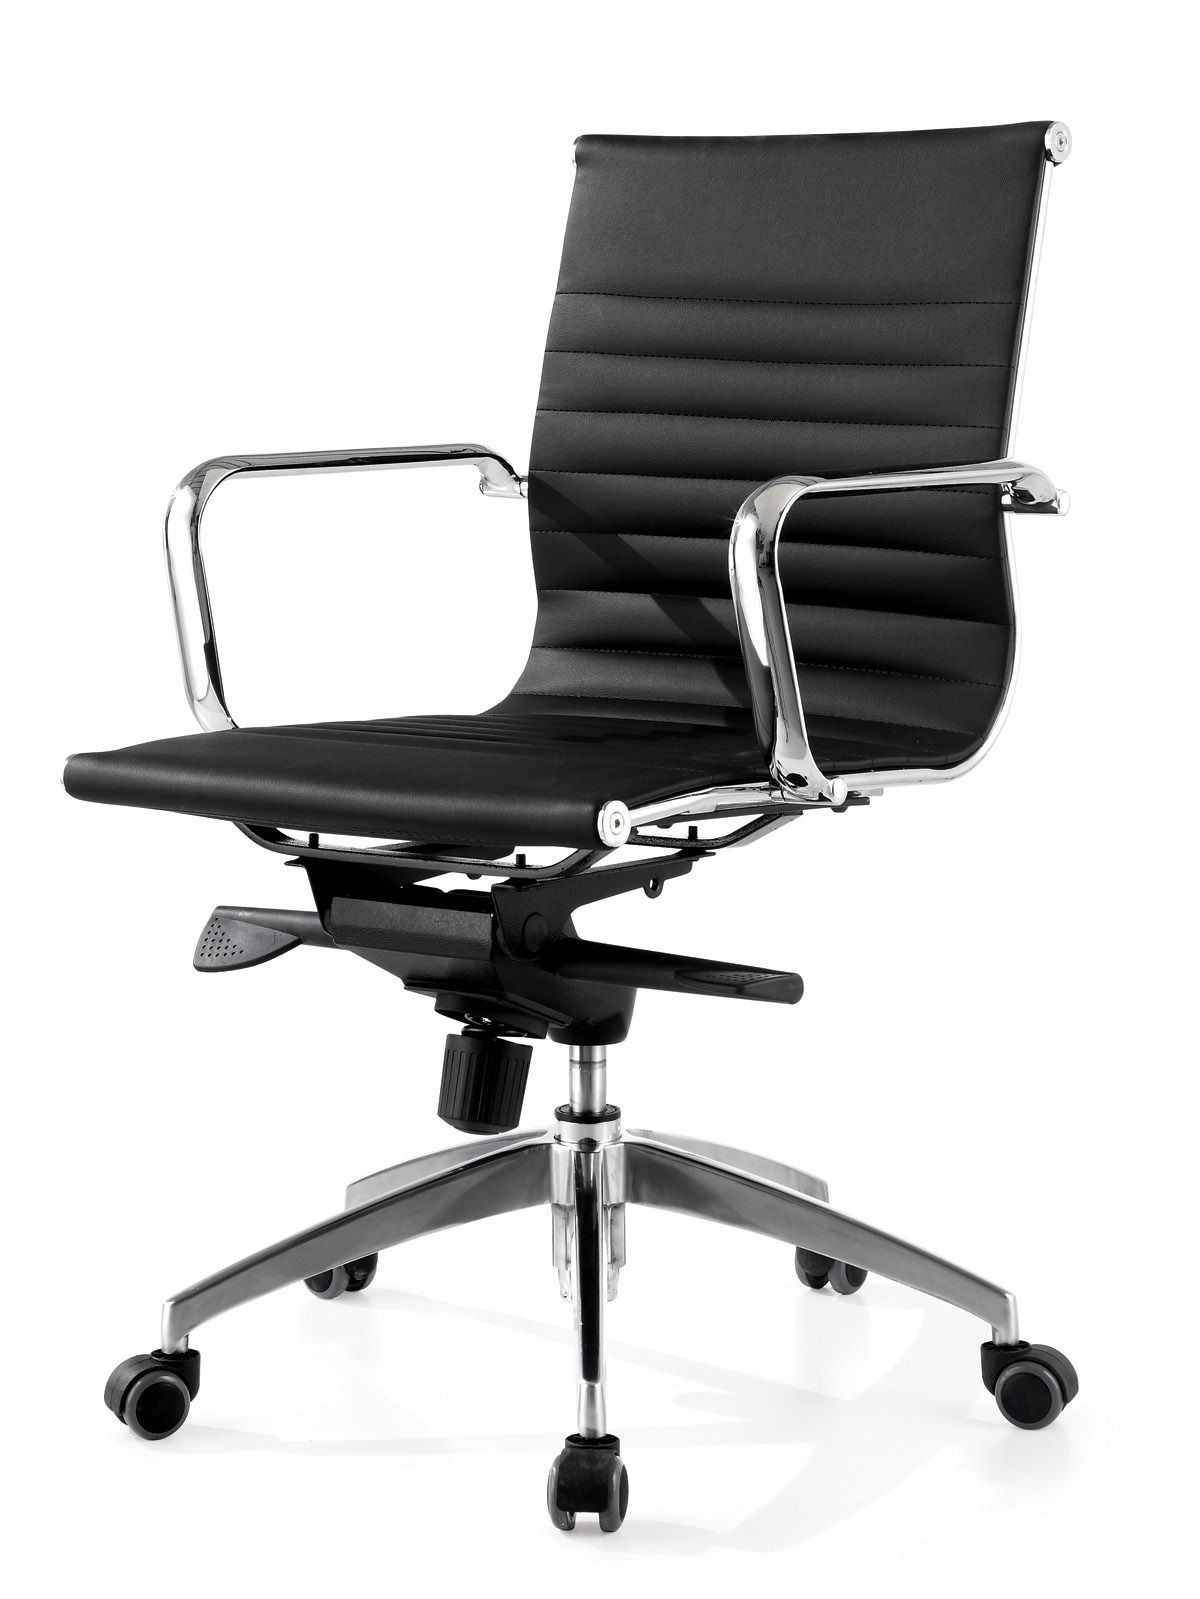 OPI Executive Eames Medium Back Boardroom / Meeting Room Chair - Chairs